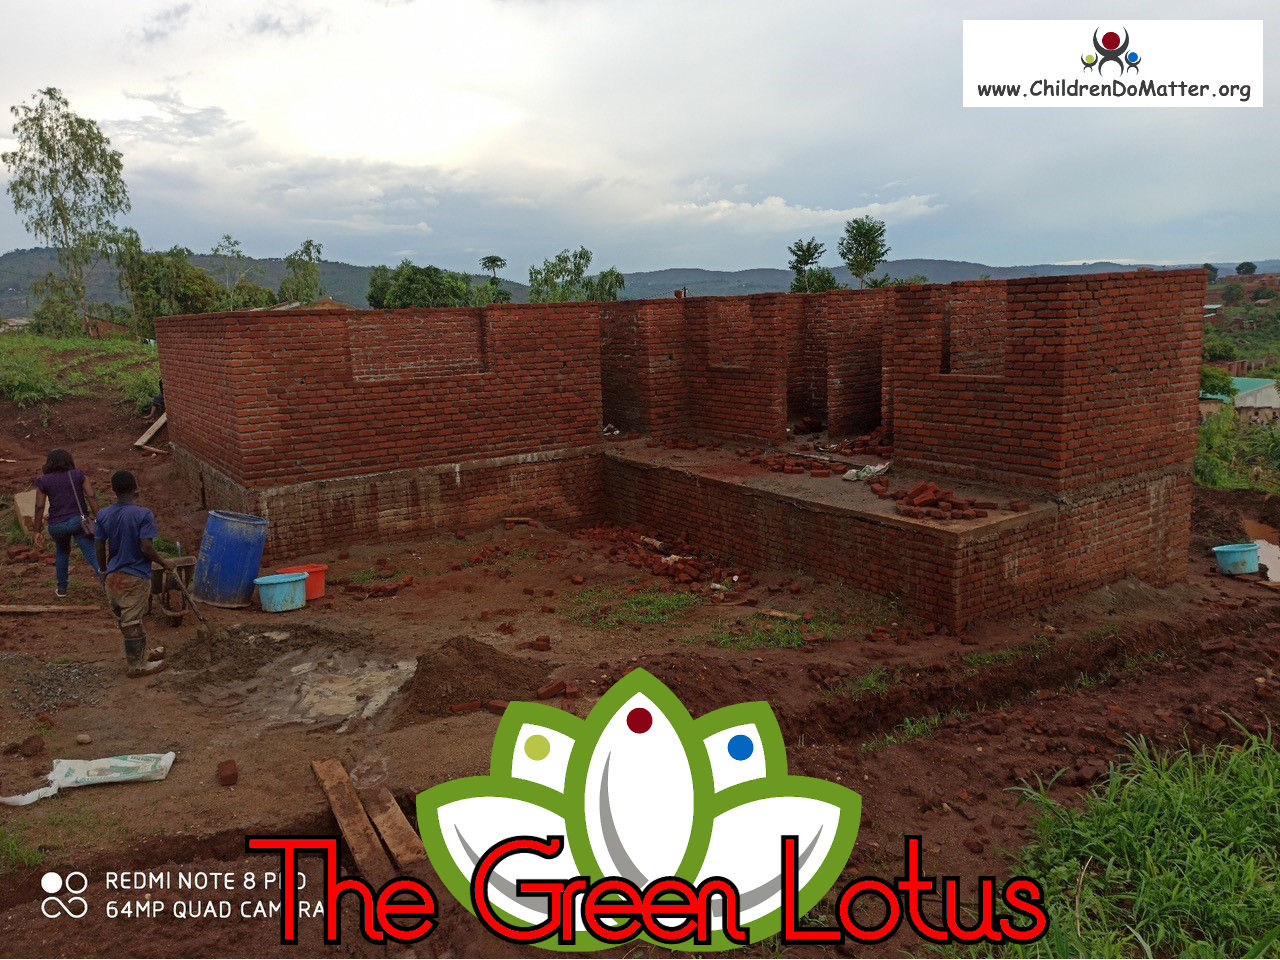 the making of the green lotus orphanage in blantyre malawi - children do matter - 13